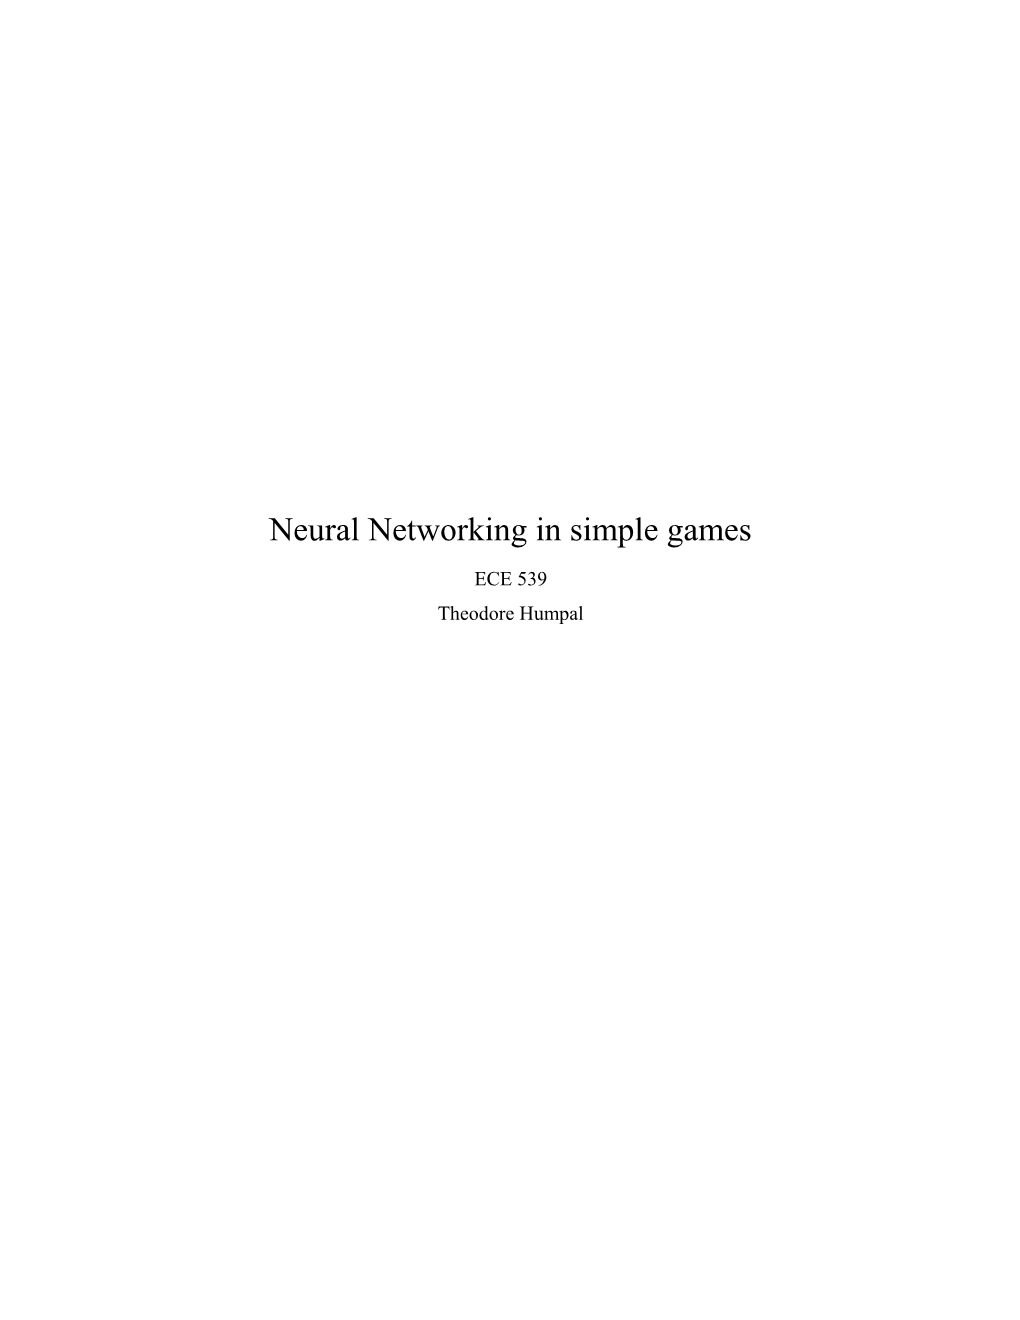 Neural Networking in Simple Games